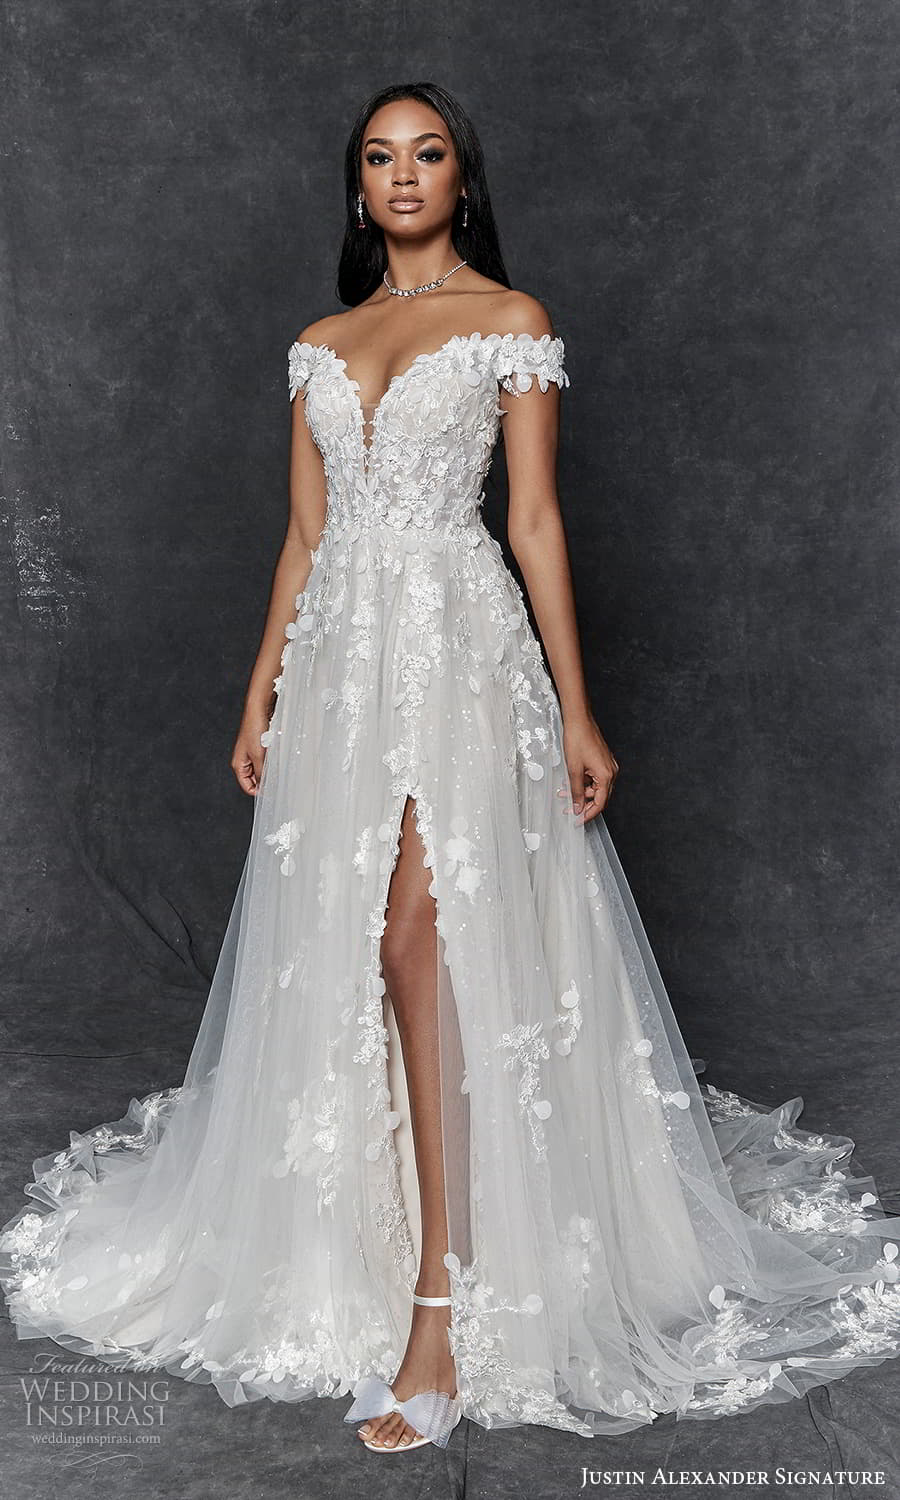 Romantic Off-the-Shoulder Long Sleeve Wedding Dress with Plunging Neckline